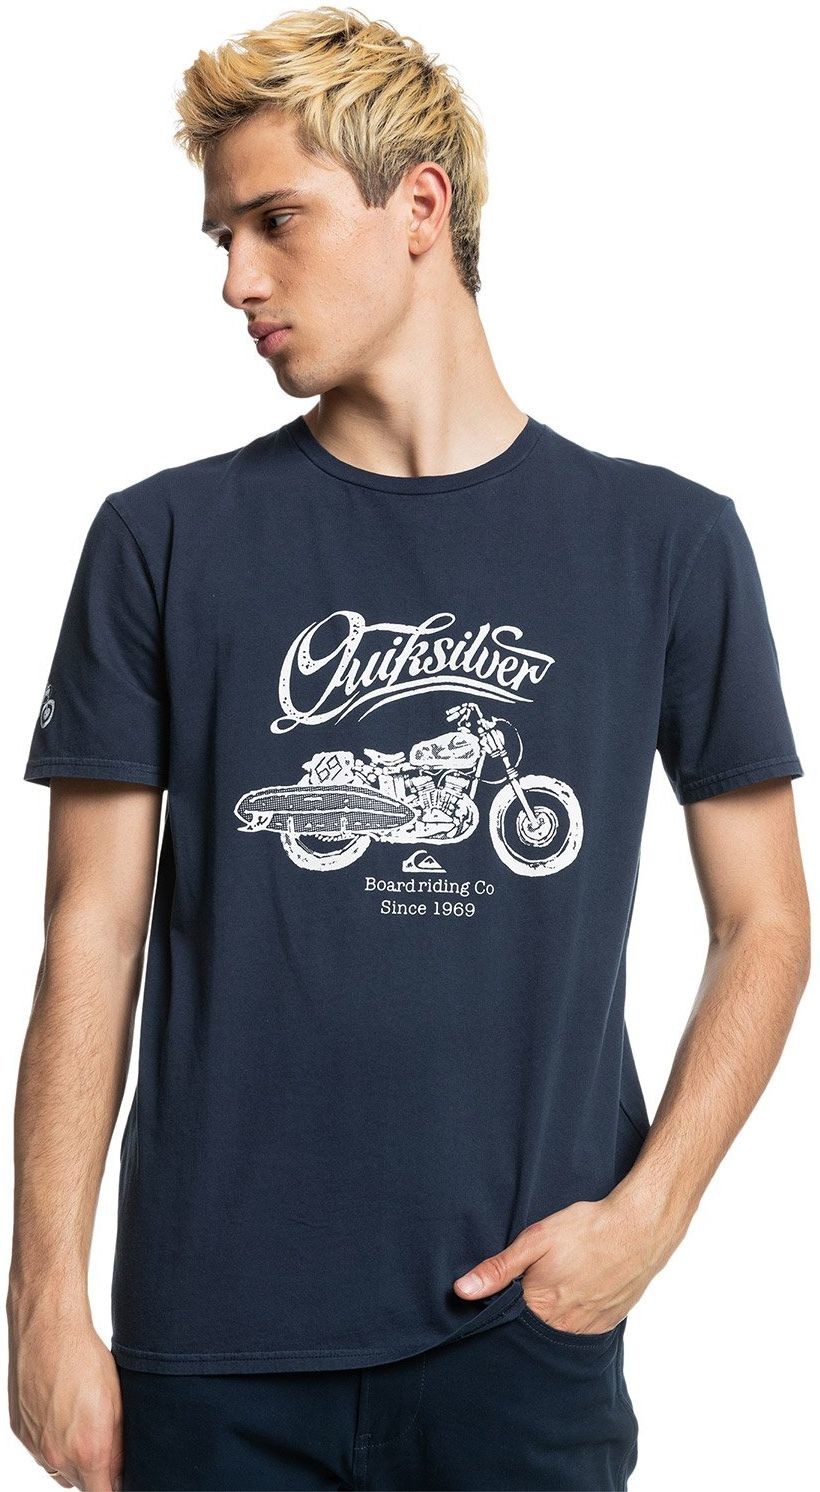 Quiksilver t-shirt TOP OF THE HOUR TEE Navy Blazer BYJ0